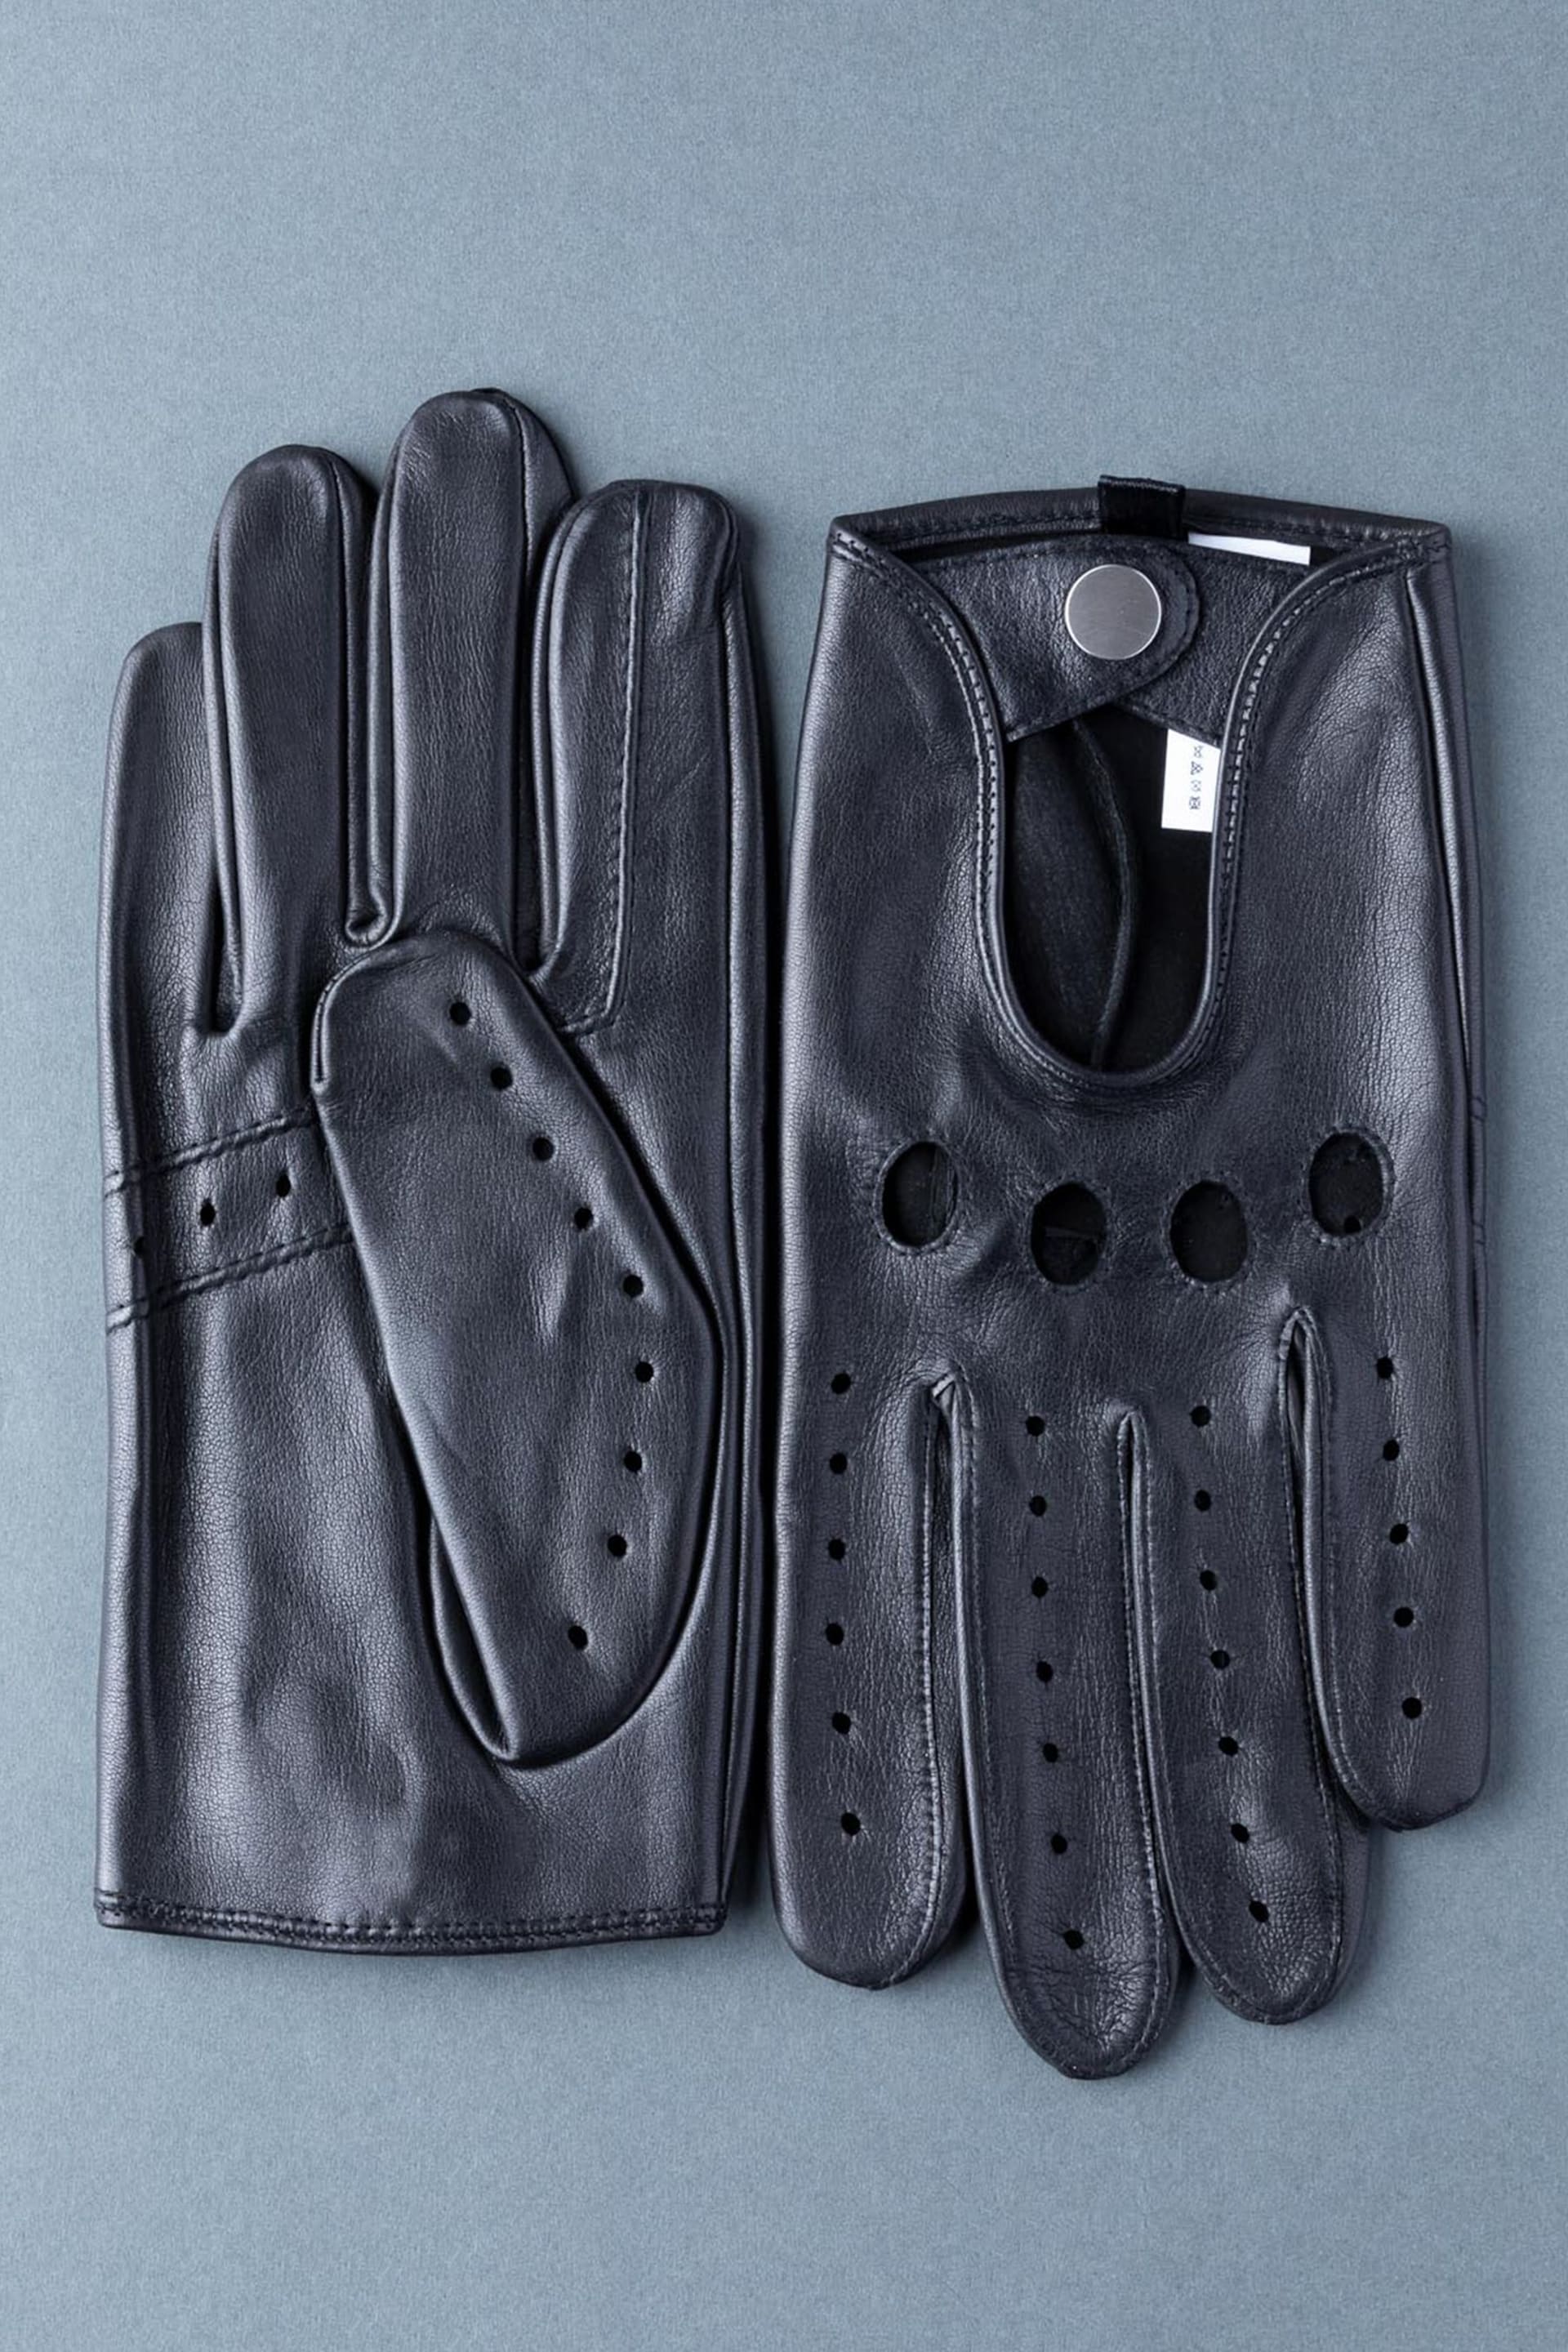 Lakeland Leather Monza Black Leather Driving Gloves - Image 1 of 3